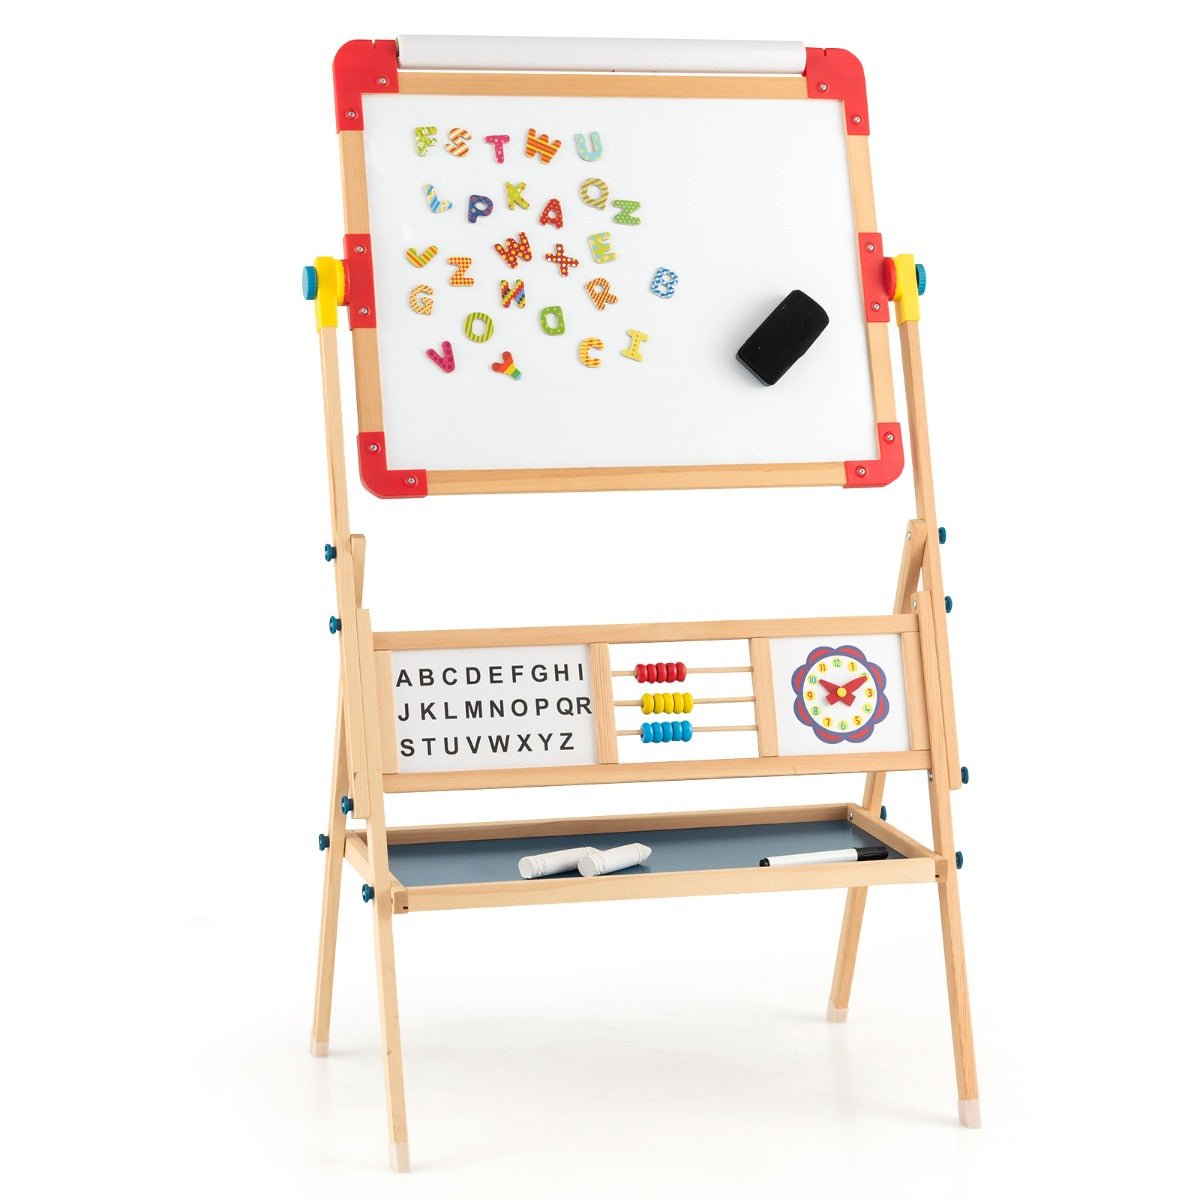 Discover Creativity: 3-in-1 Wooden Art Easel with Drawing Paper Roll